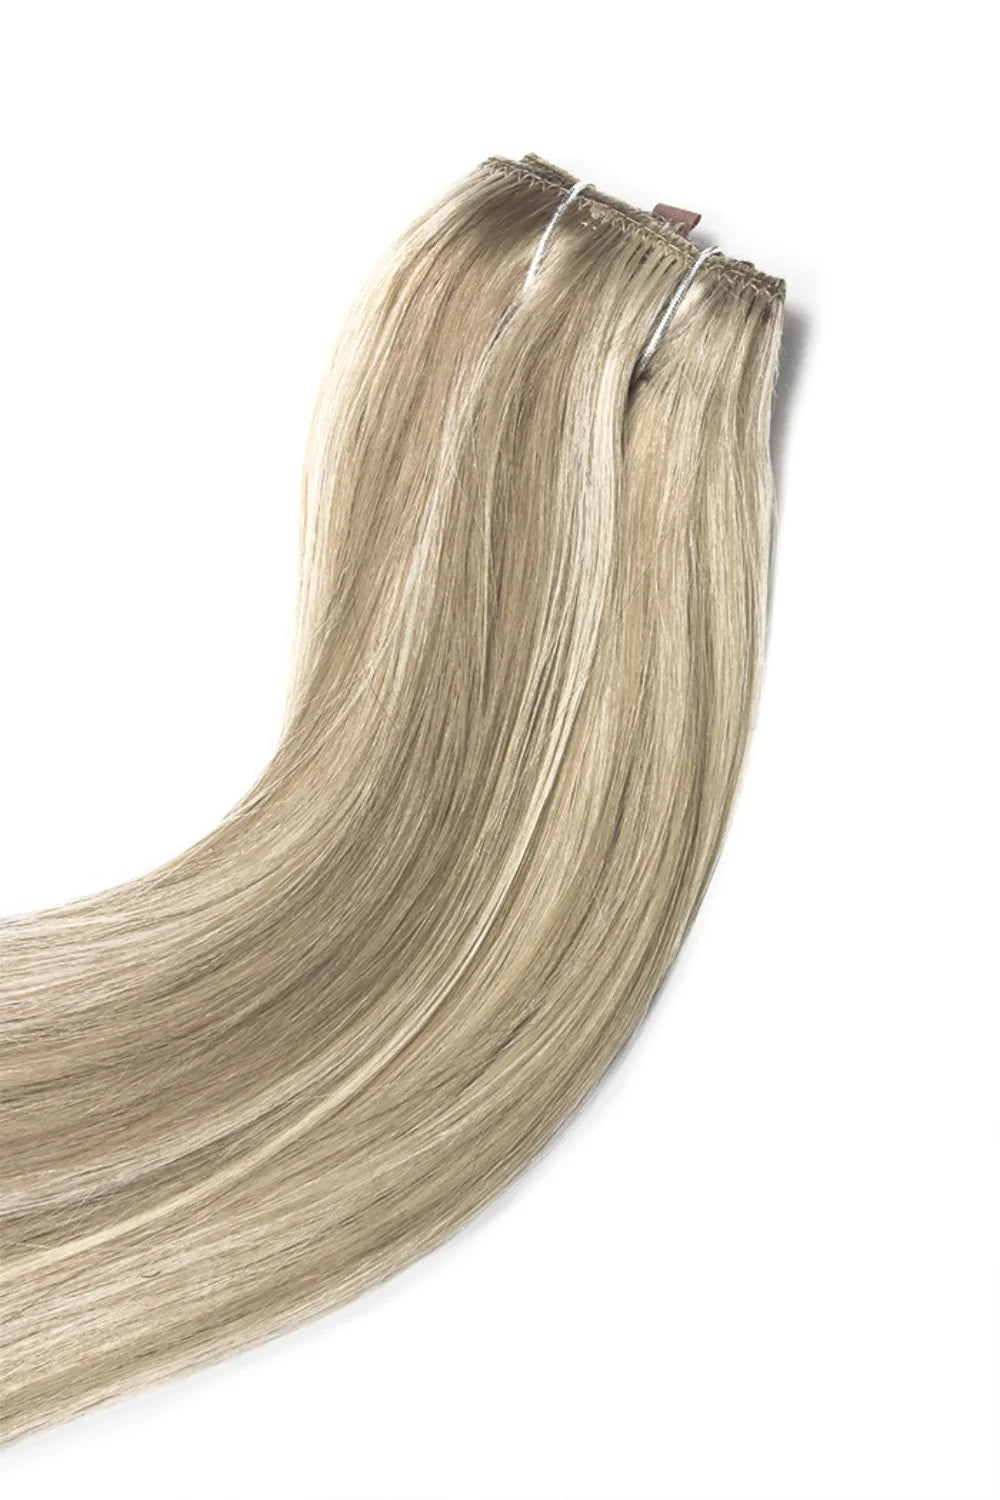 #8/60 quad weft hair extension cropped